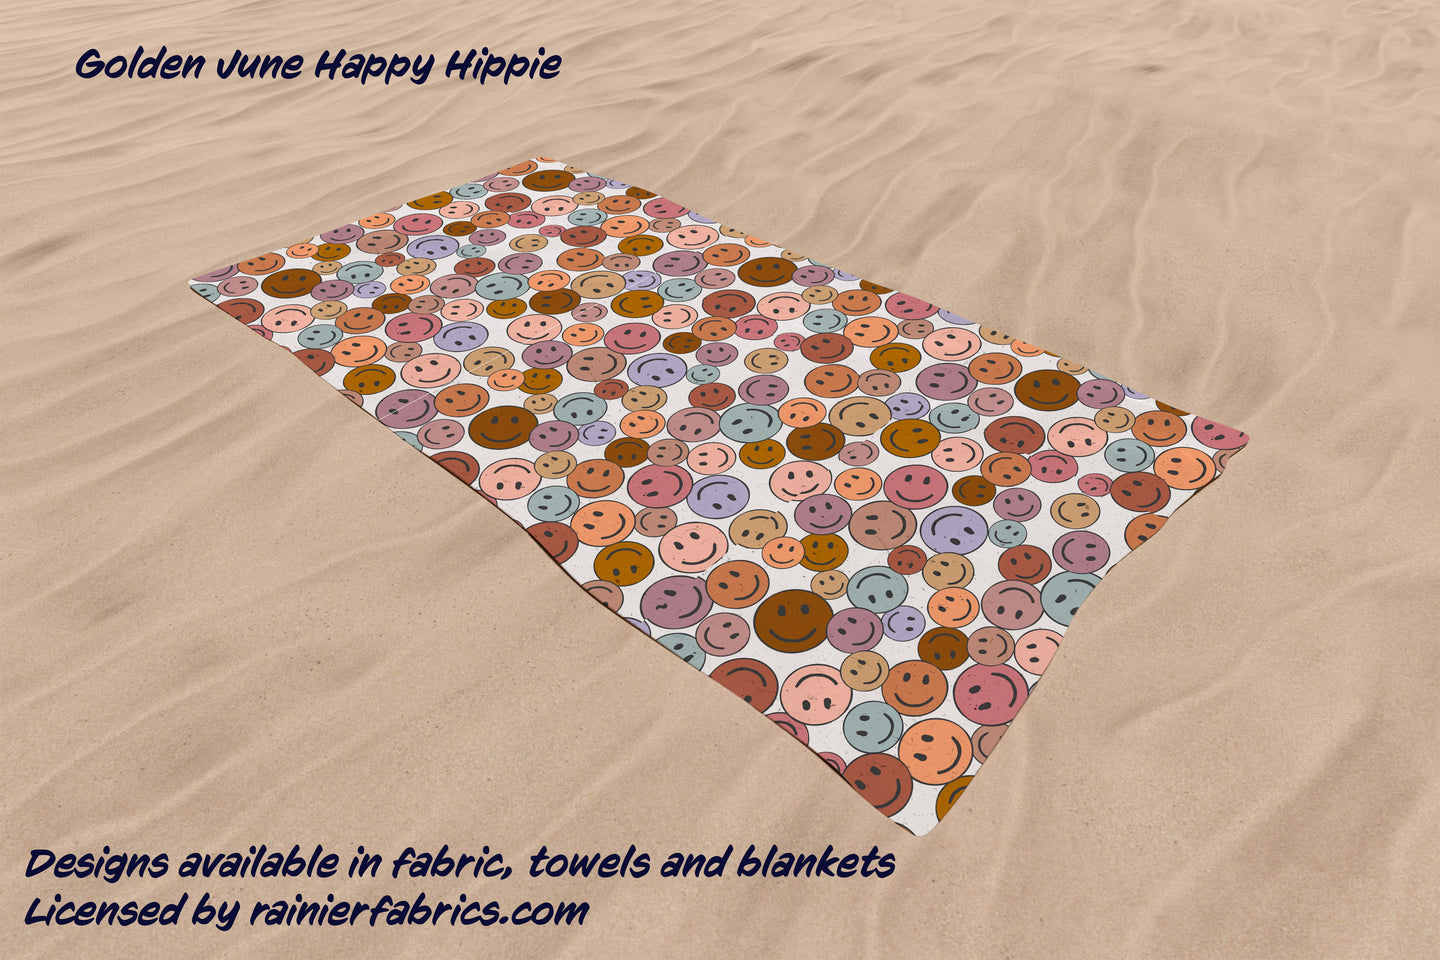 Happy Hippy Smiley Faces - designed by Golden June - Order by 1/2 yard; Description of bases below